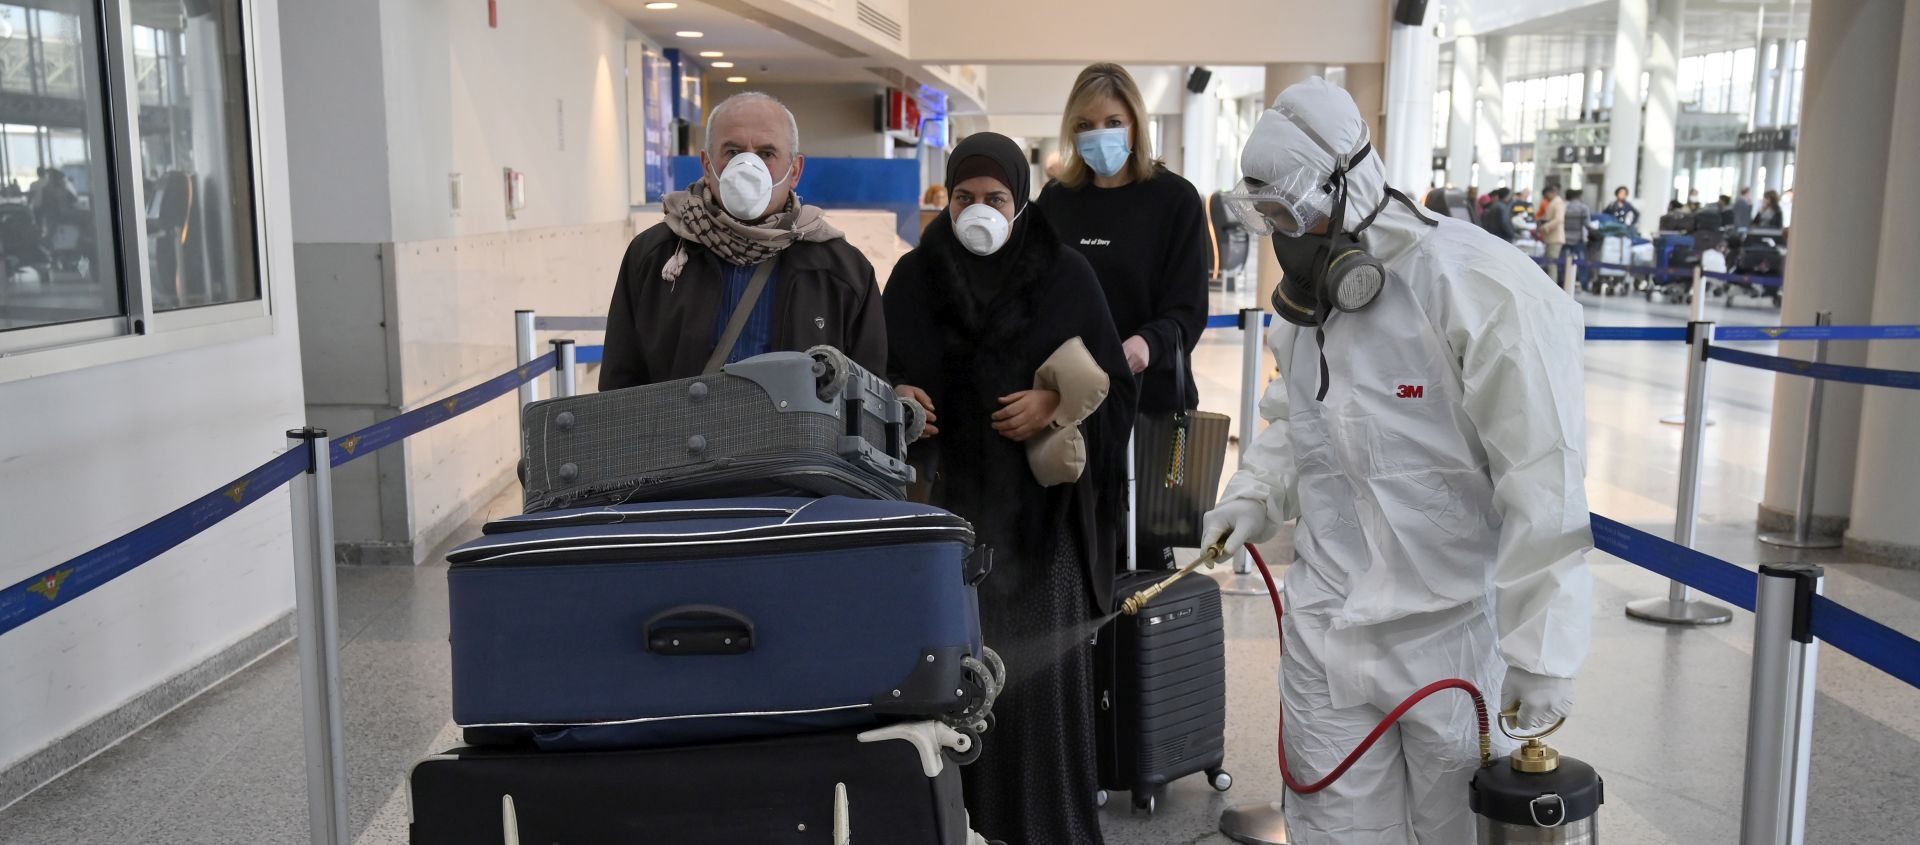 epa08271483 A worker wearing a protective suit sprays disinfectant as a precaution against the spread of the Covid-19 Coronavirus at Rafik Hariri international airport in Beirut, Lebanon, 05 March 2020. According to media reports, two new cases of coronavirus were confirmed on 04 March by a Health Ministry source, bringing the total number of those who have been infected in Lebanon to 15 cases.  EPA/WAEL HAMZEH